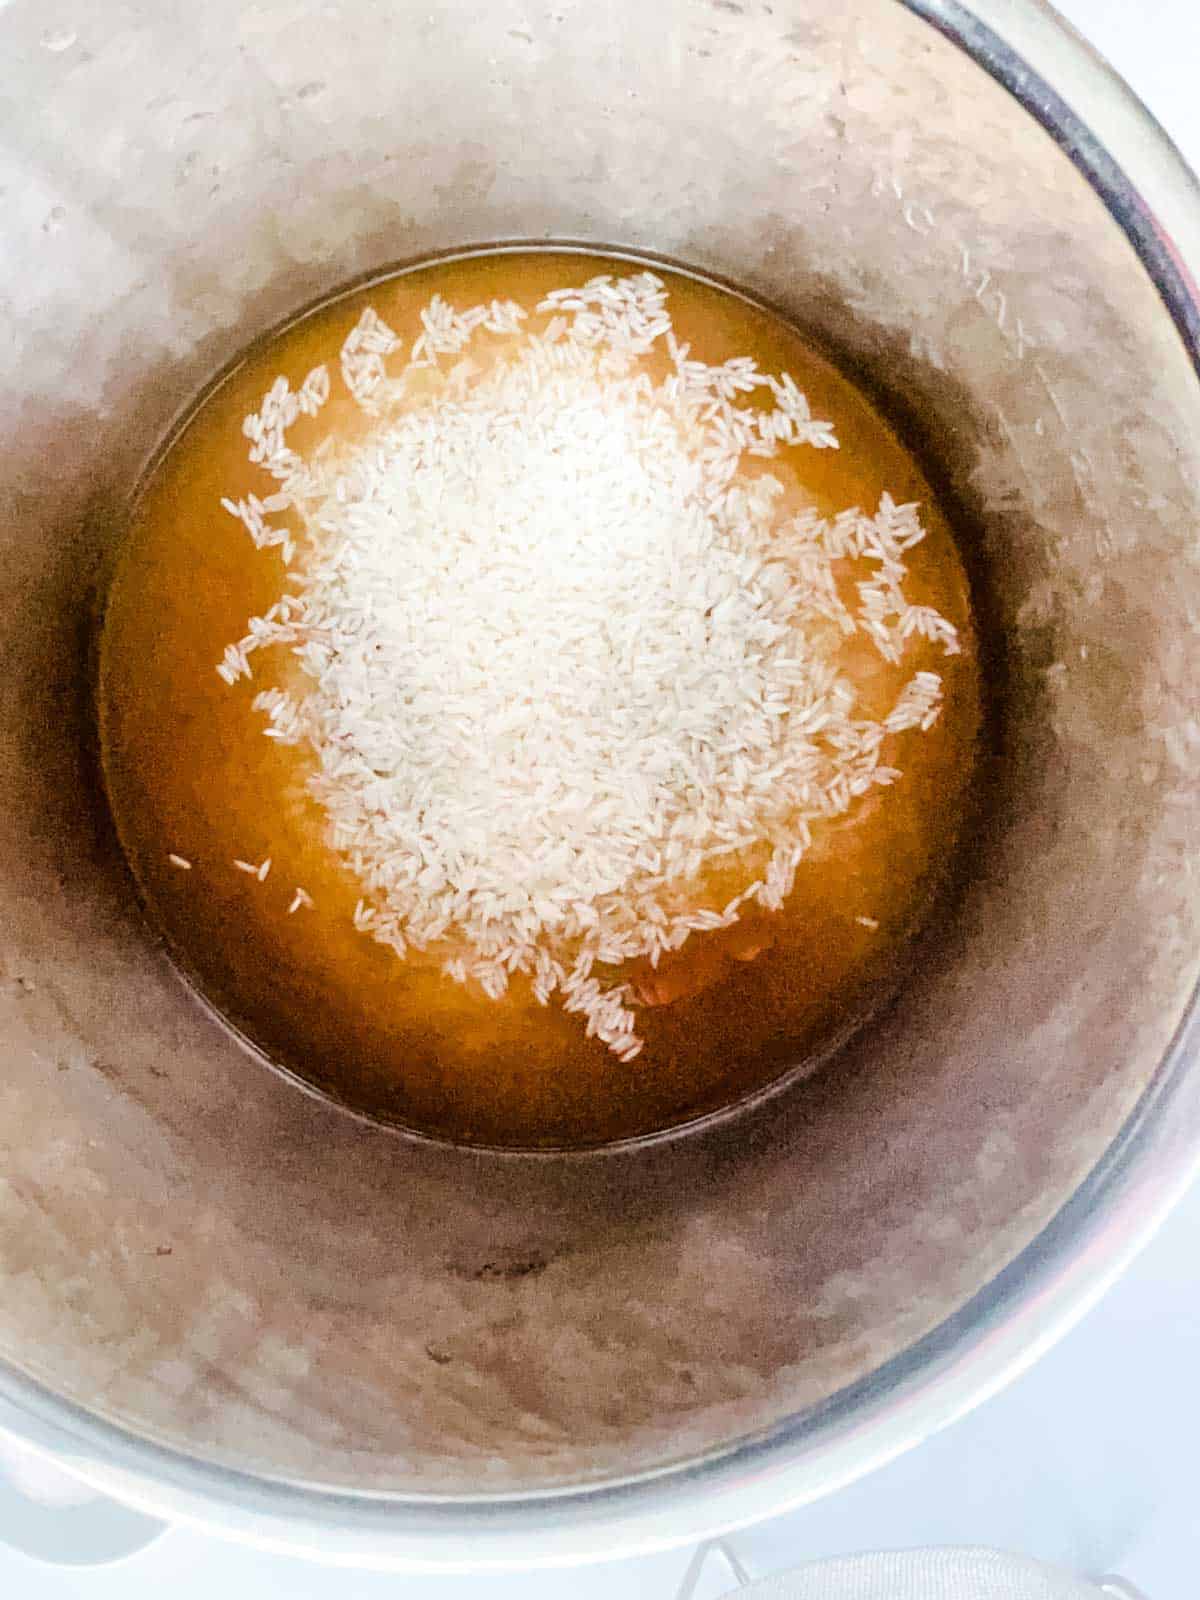 Broth and rice in and instant pot.